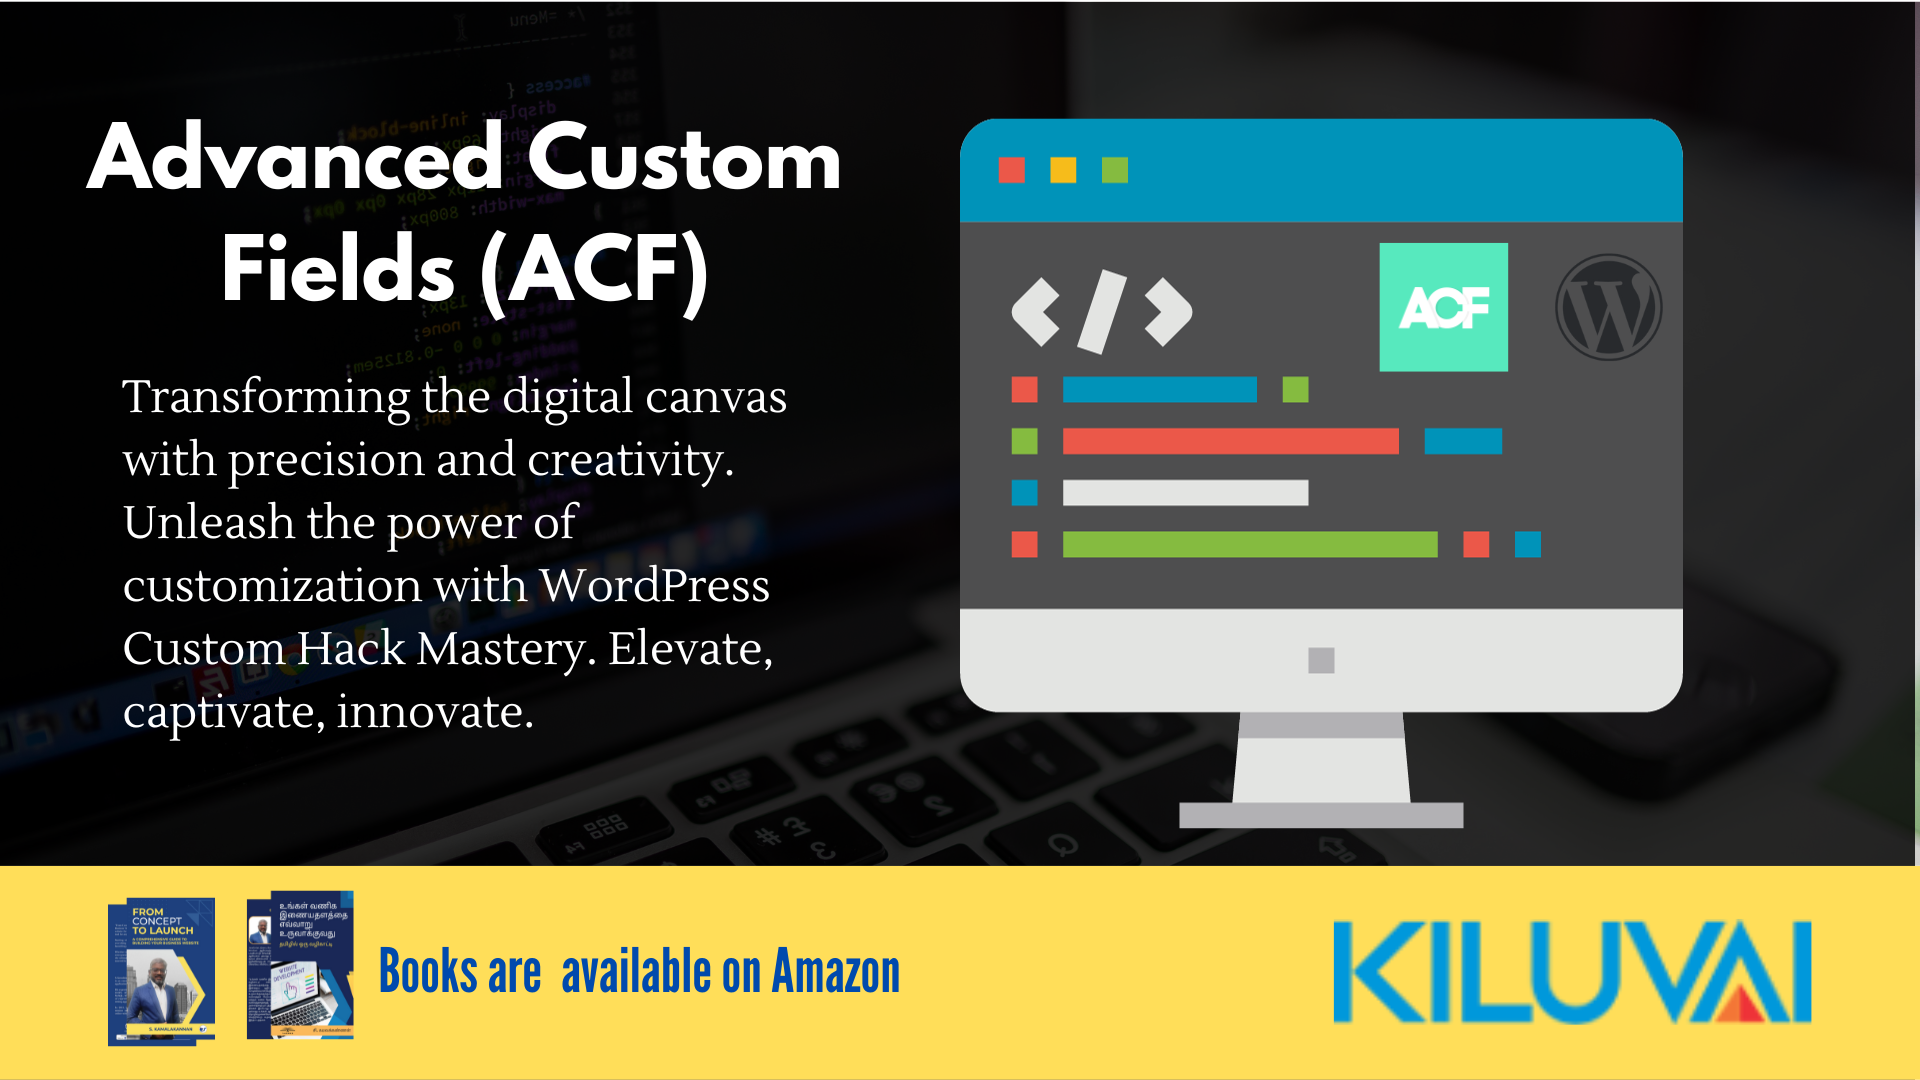 Advanced Custom Fields (ACF) Transforming the digital canvas with precision and creativity. Unleash the power of customization with WordPress Custom Hack Mastery. Elevate, captivate, innovate.